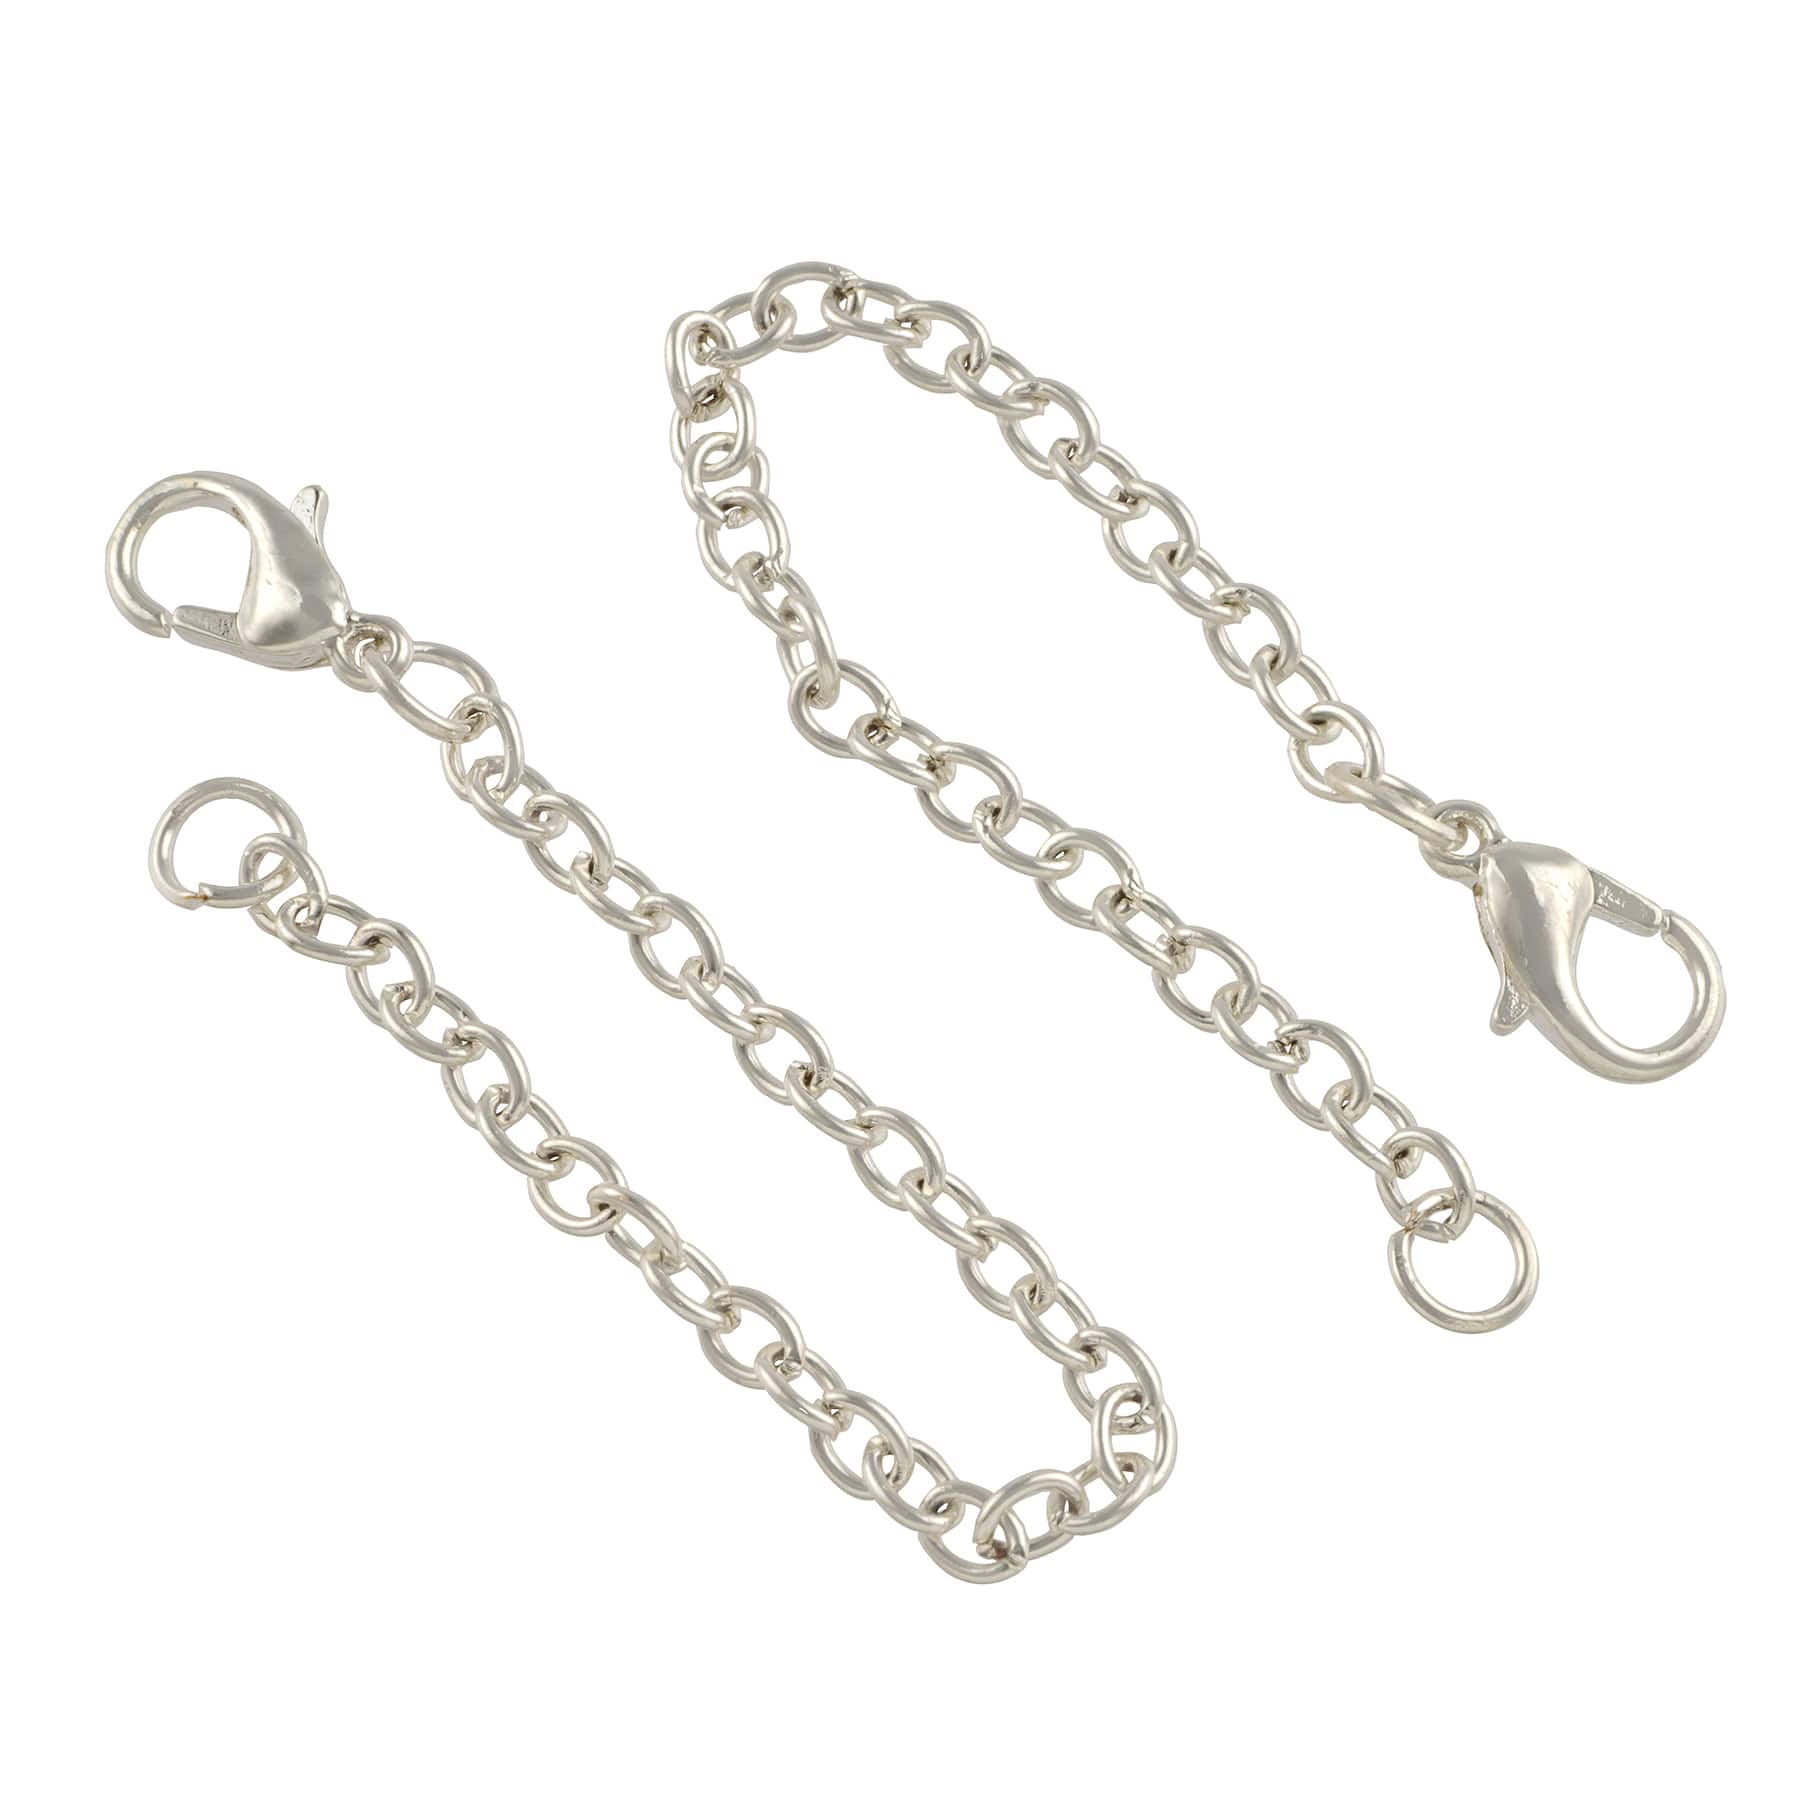 3 Pcs Necklace Extender Sterling Silver Chain Extenders for